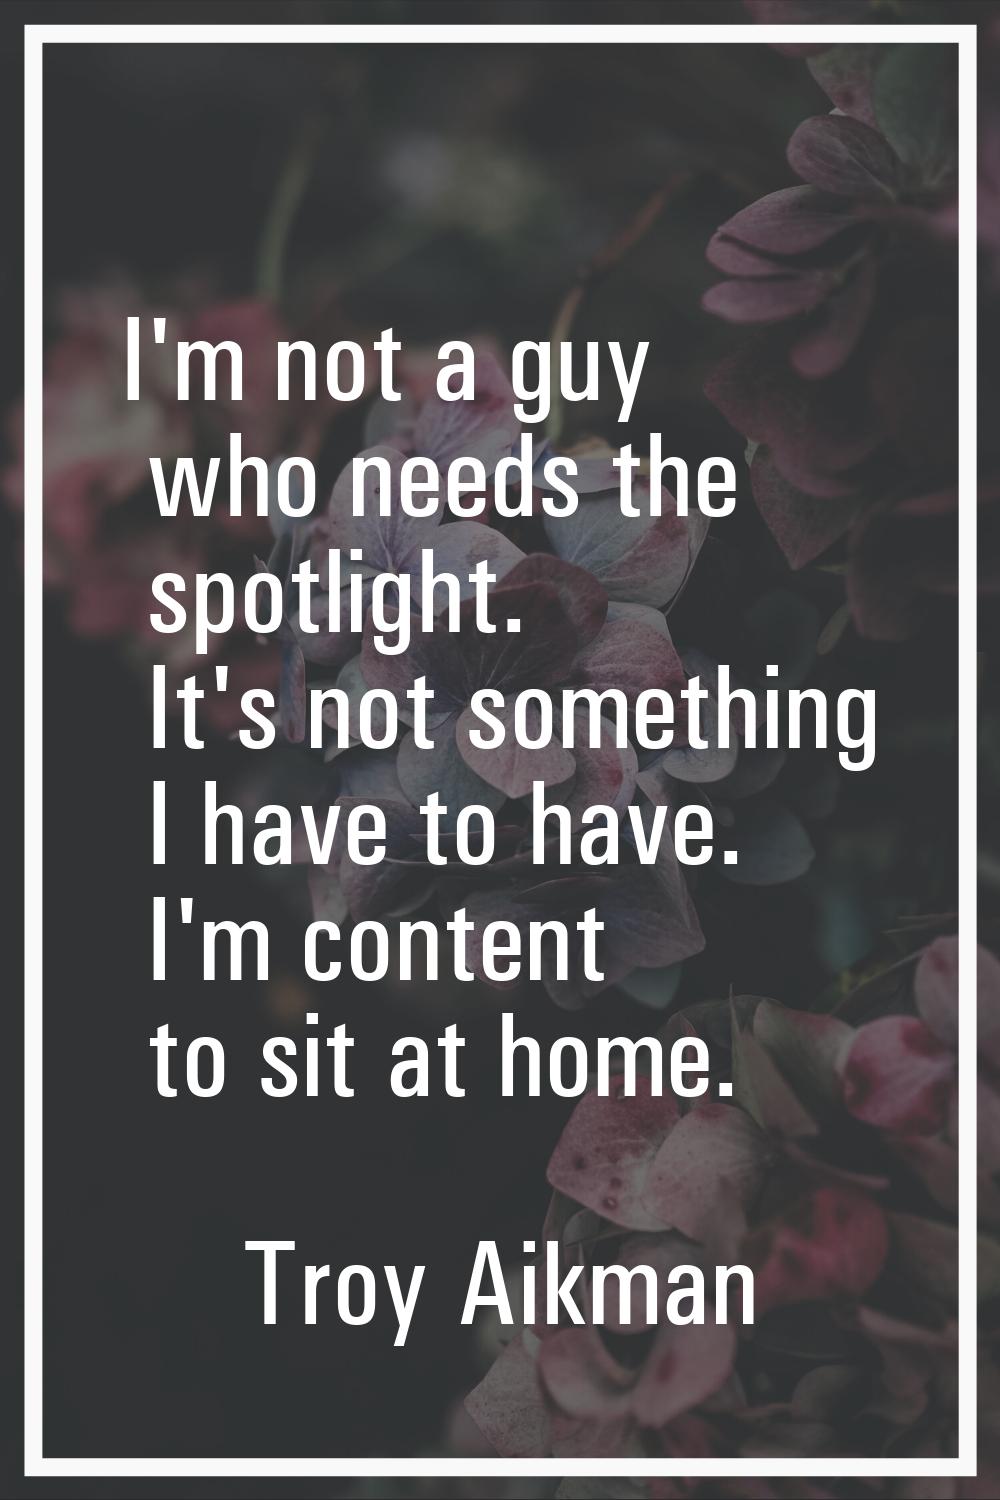 I'm not a guy who needs the spotlight. It's not something I have to have. I'm content to sit at hom